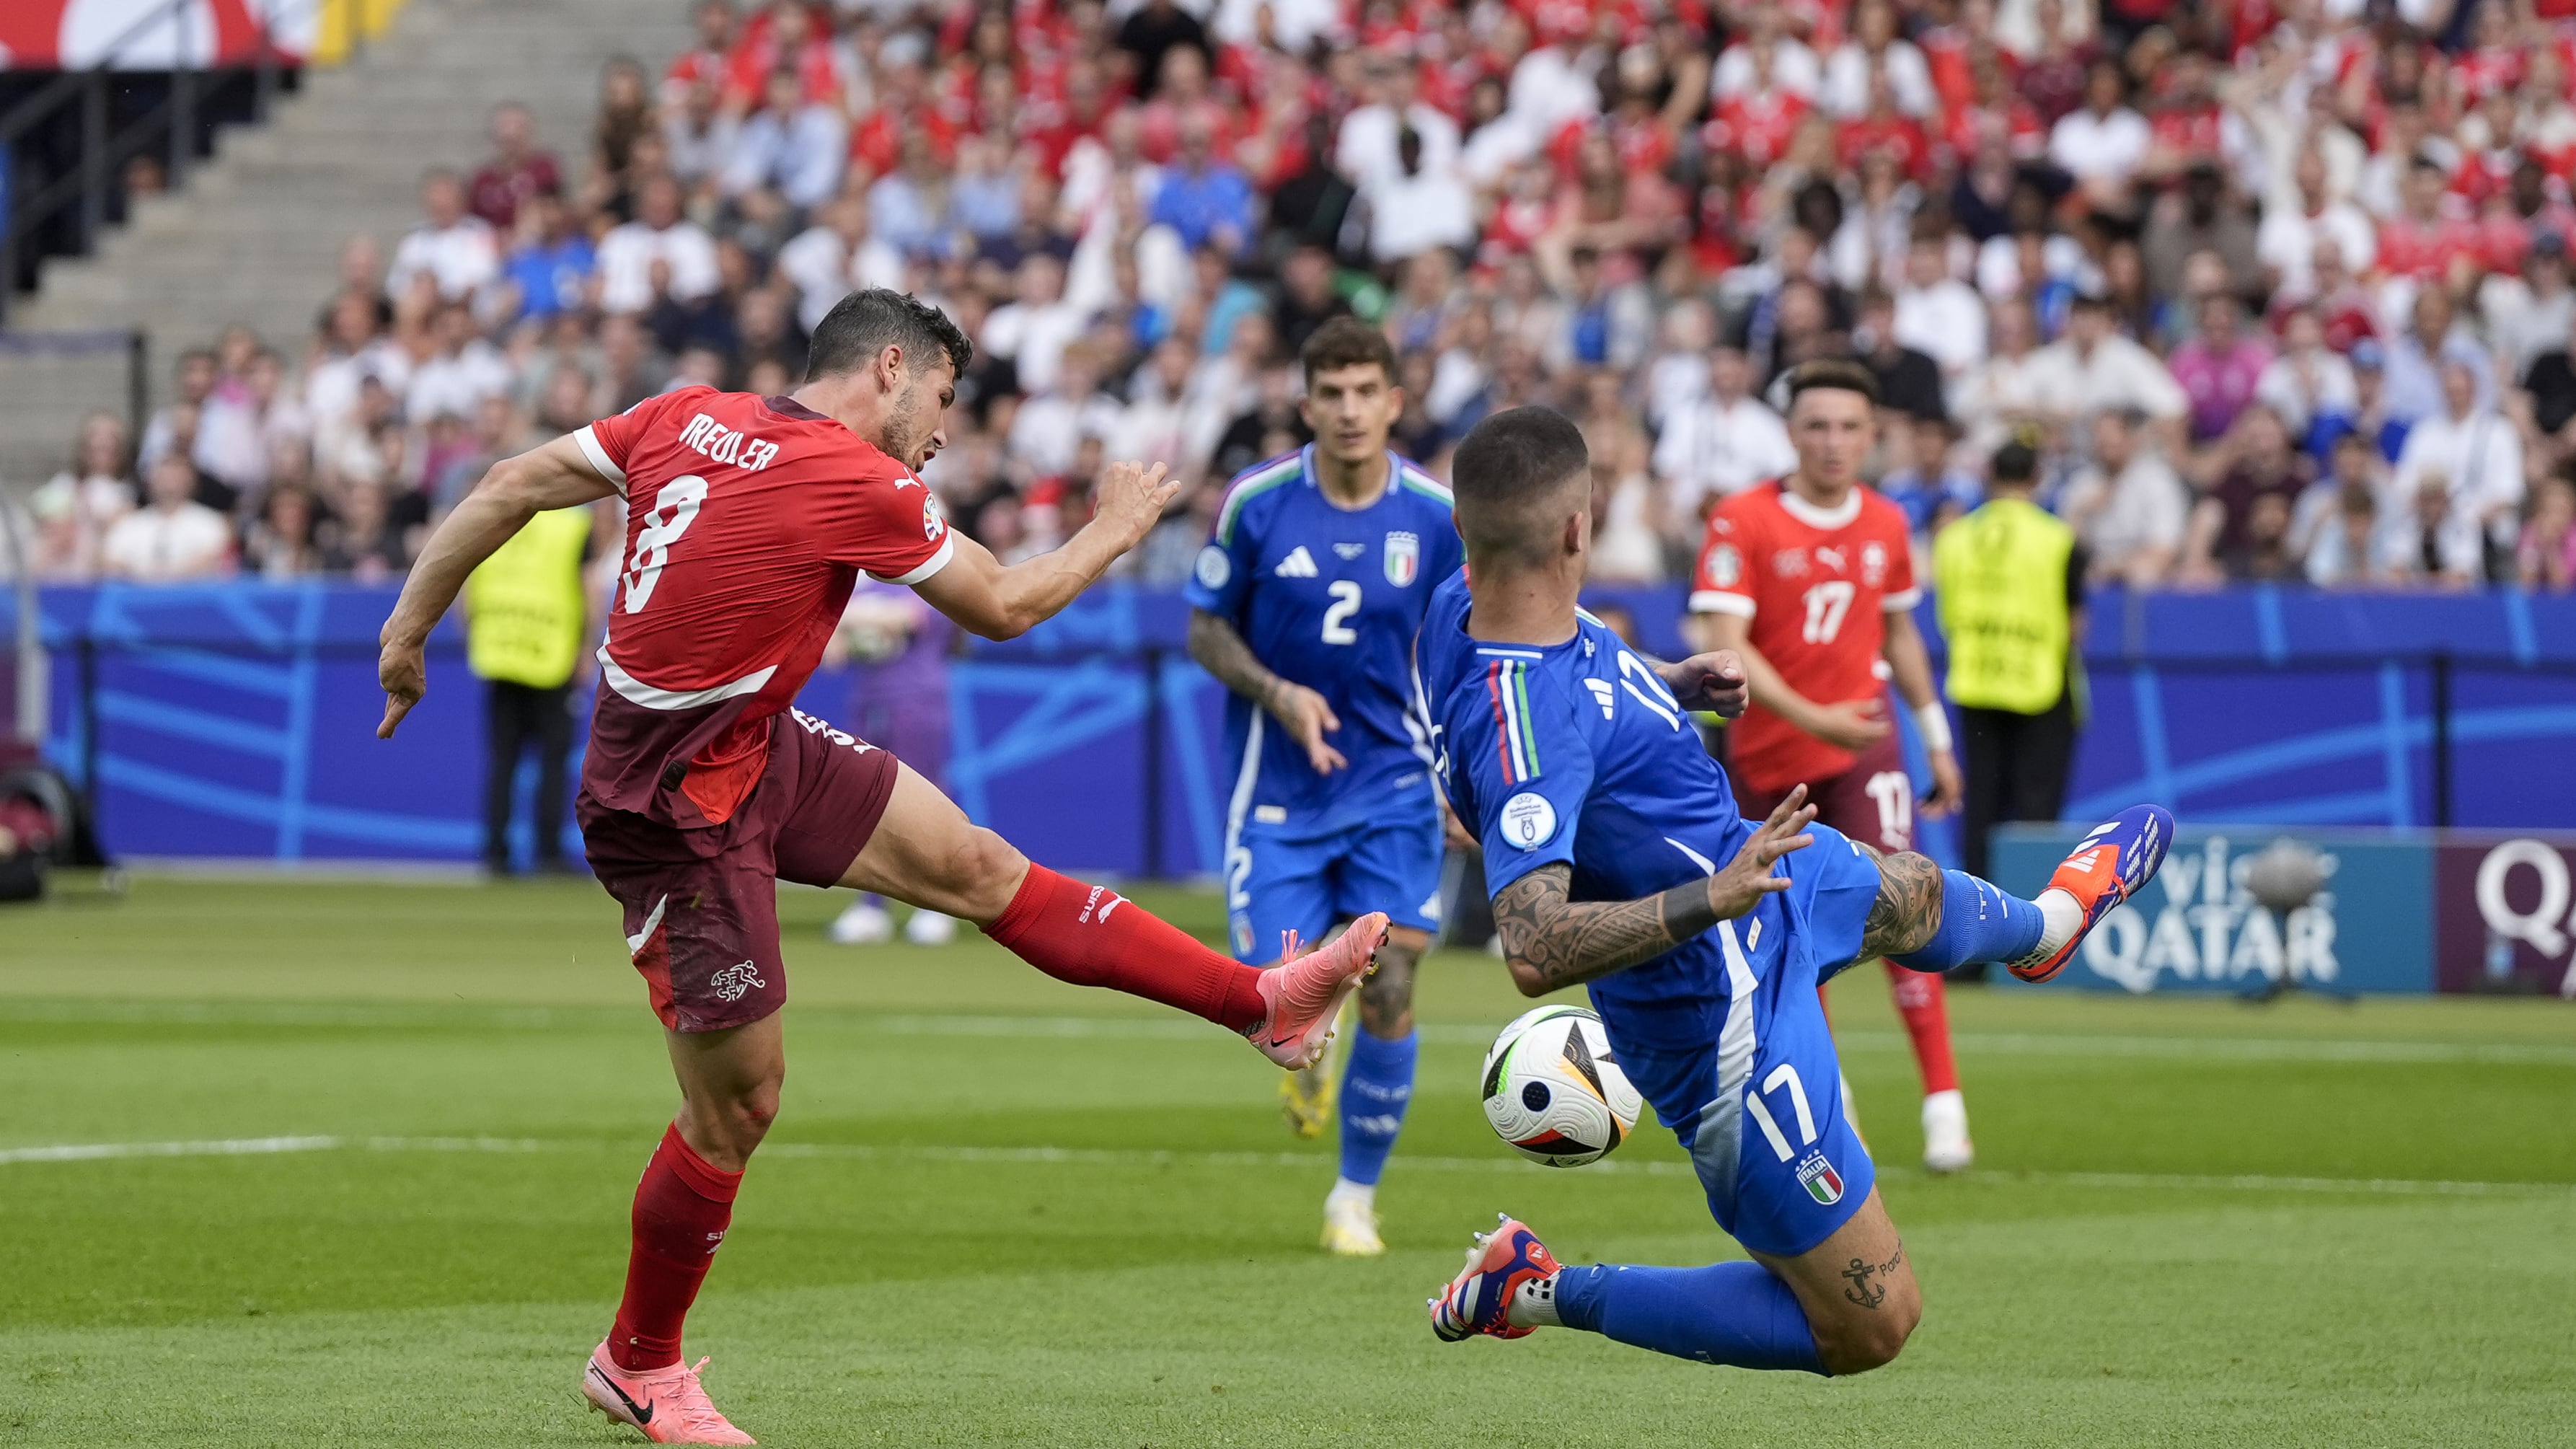 Remo Freuler scored the opening goal as Switzerland defeated Italy 2-0 in Berlin